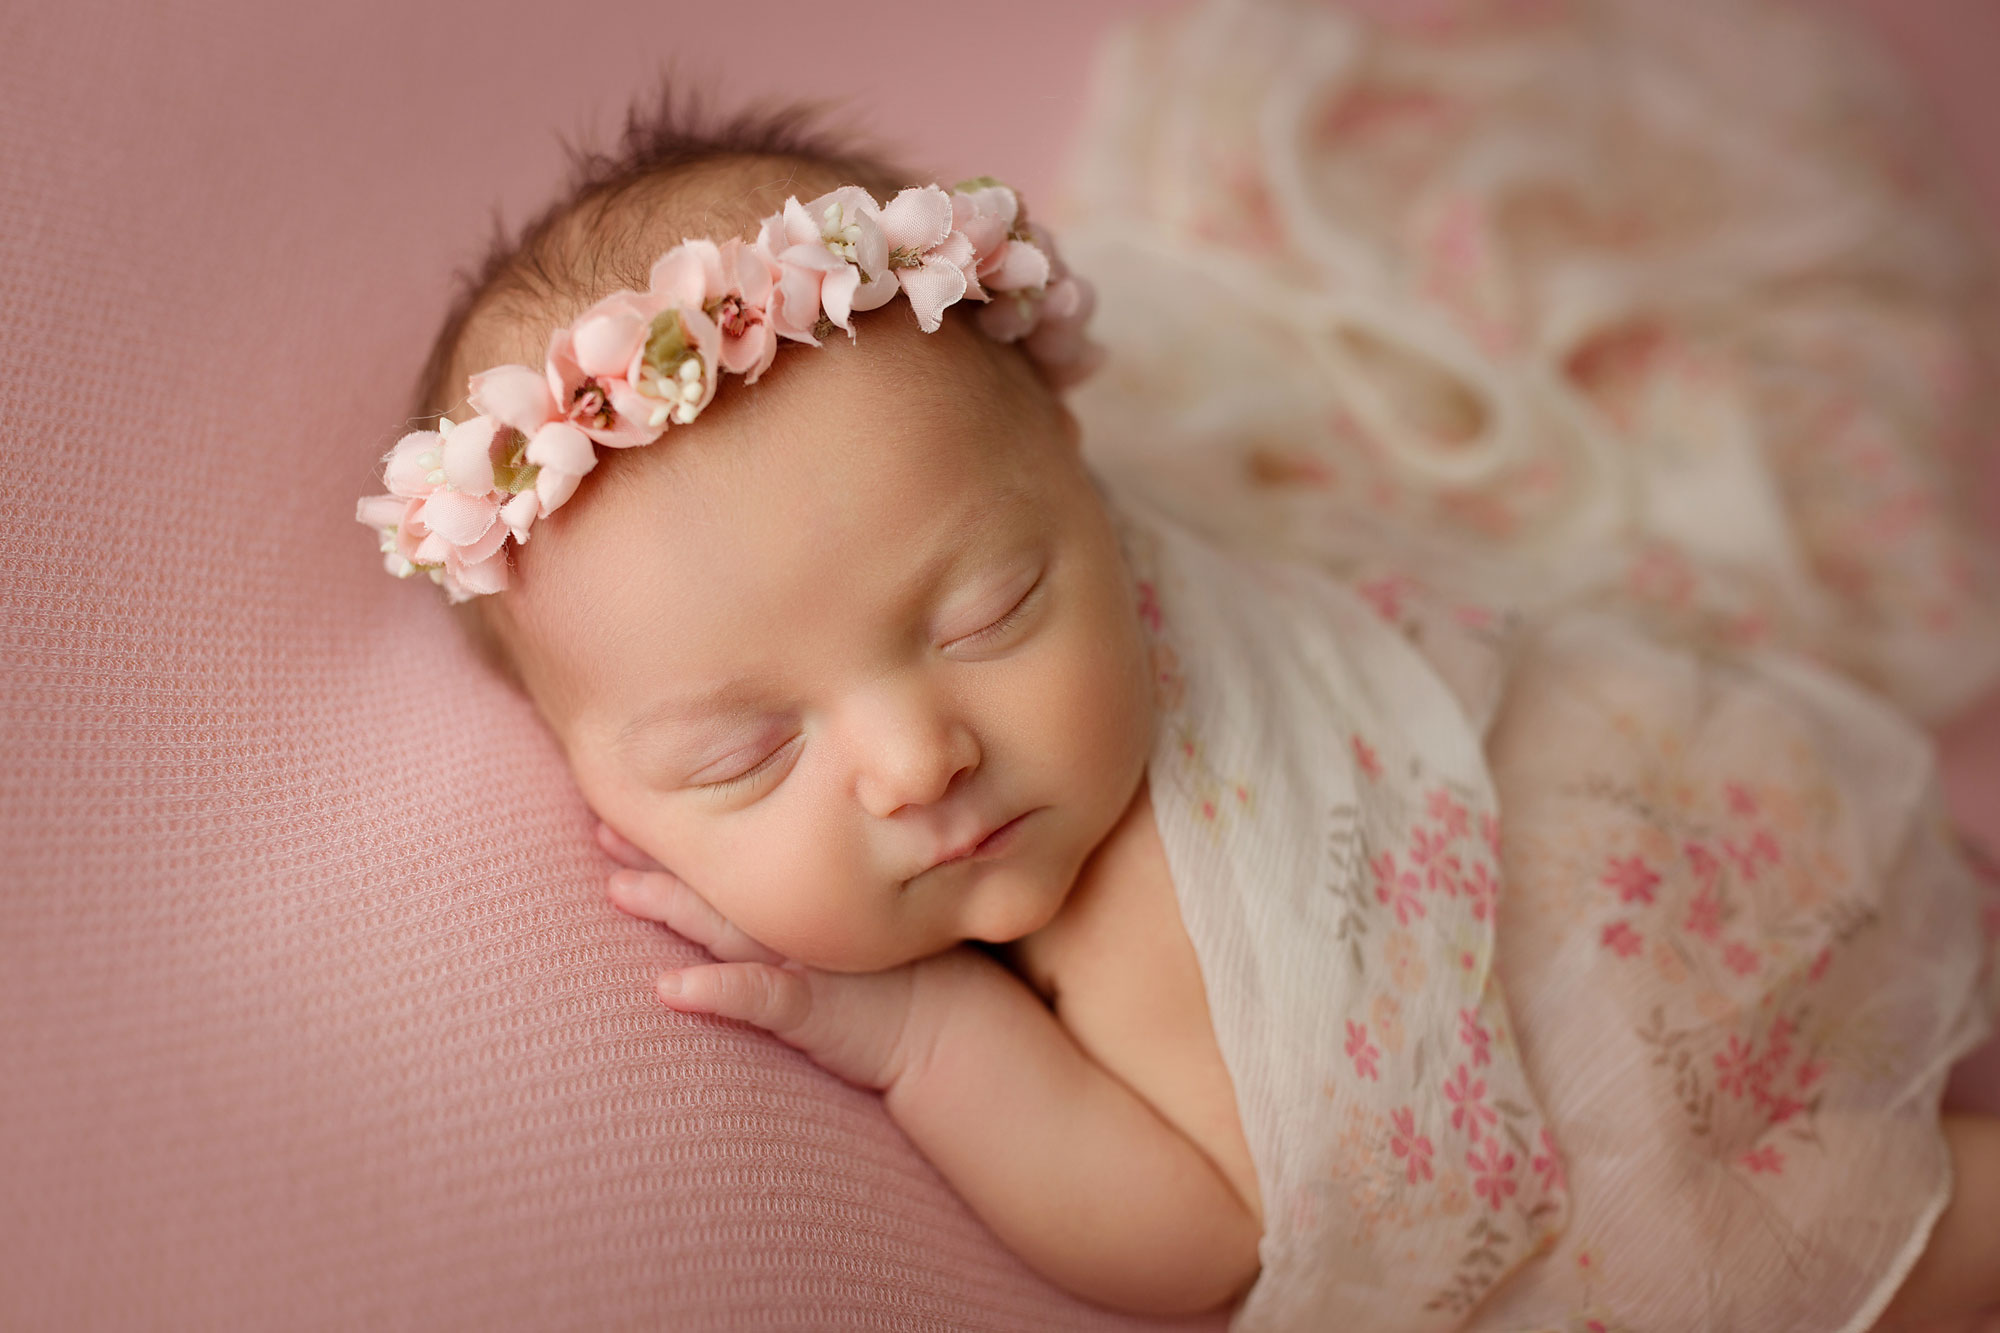 baby girl pictures, infant with floral wrap and headband asleep on pink fabric